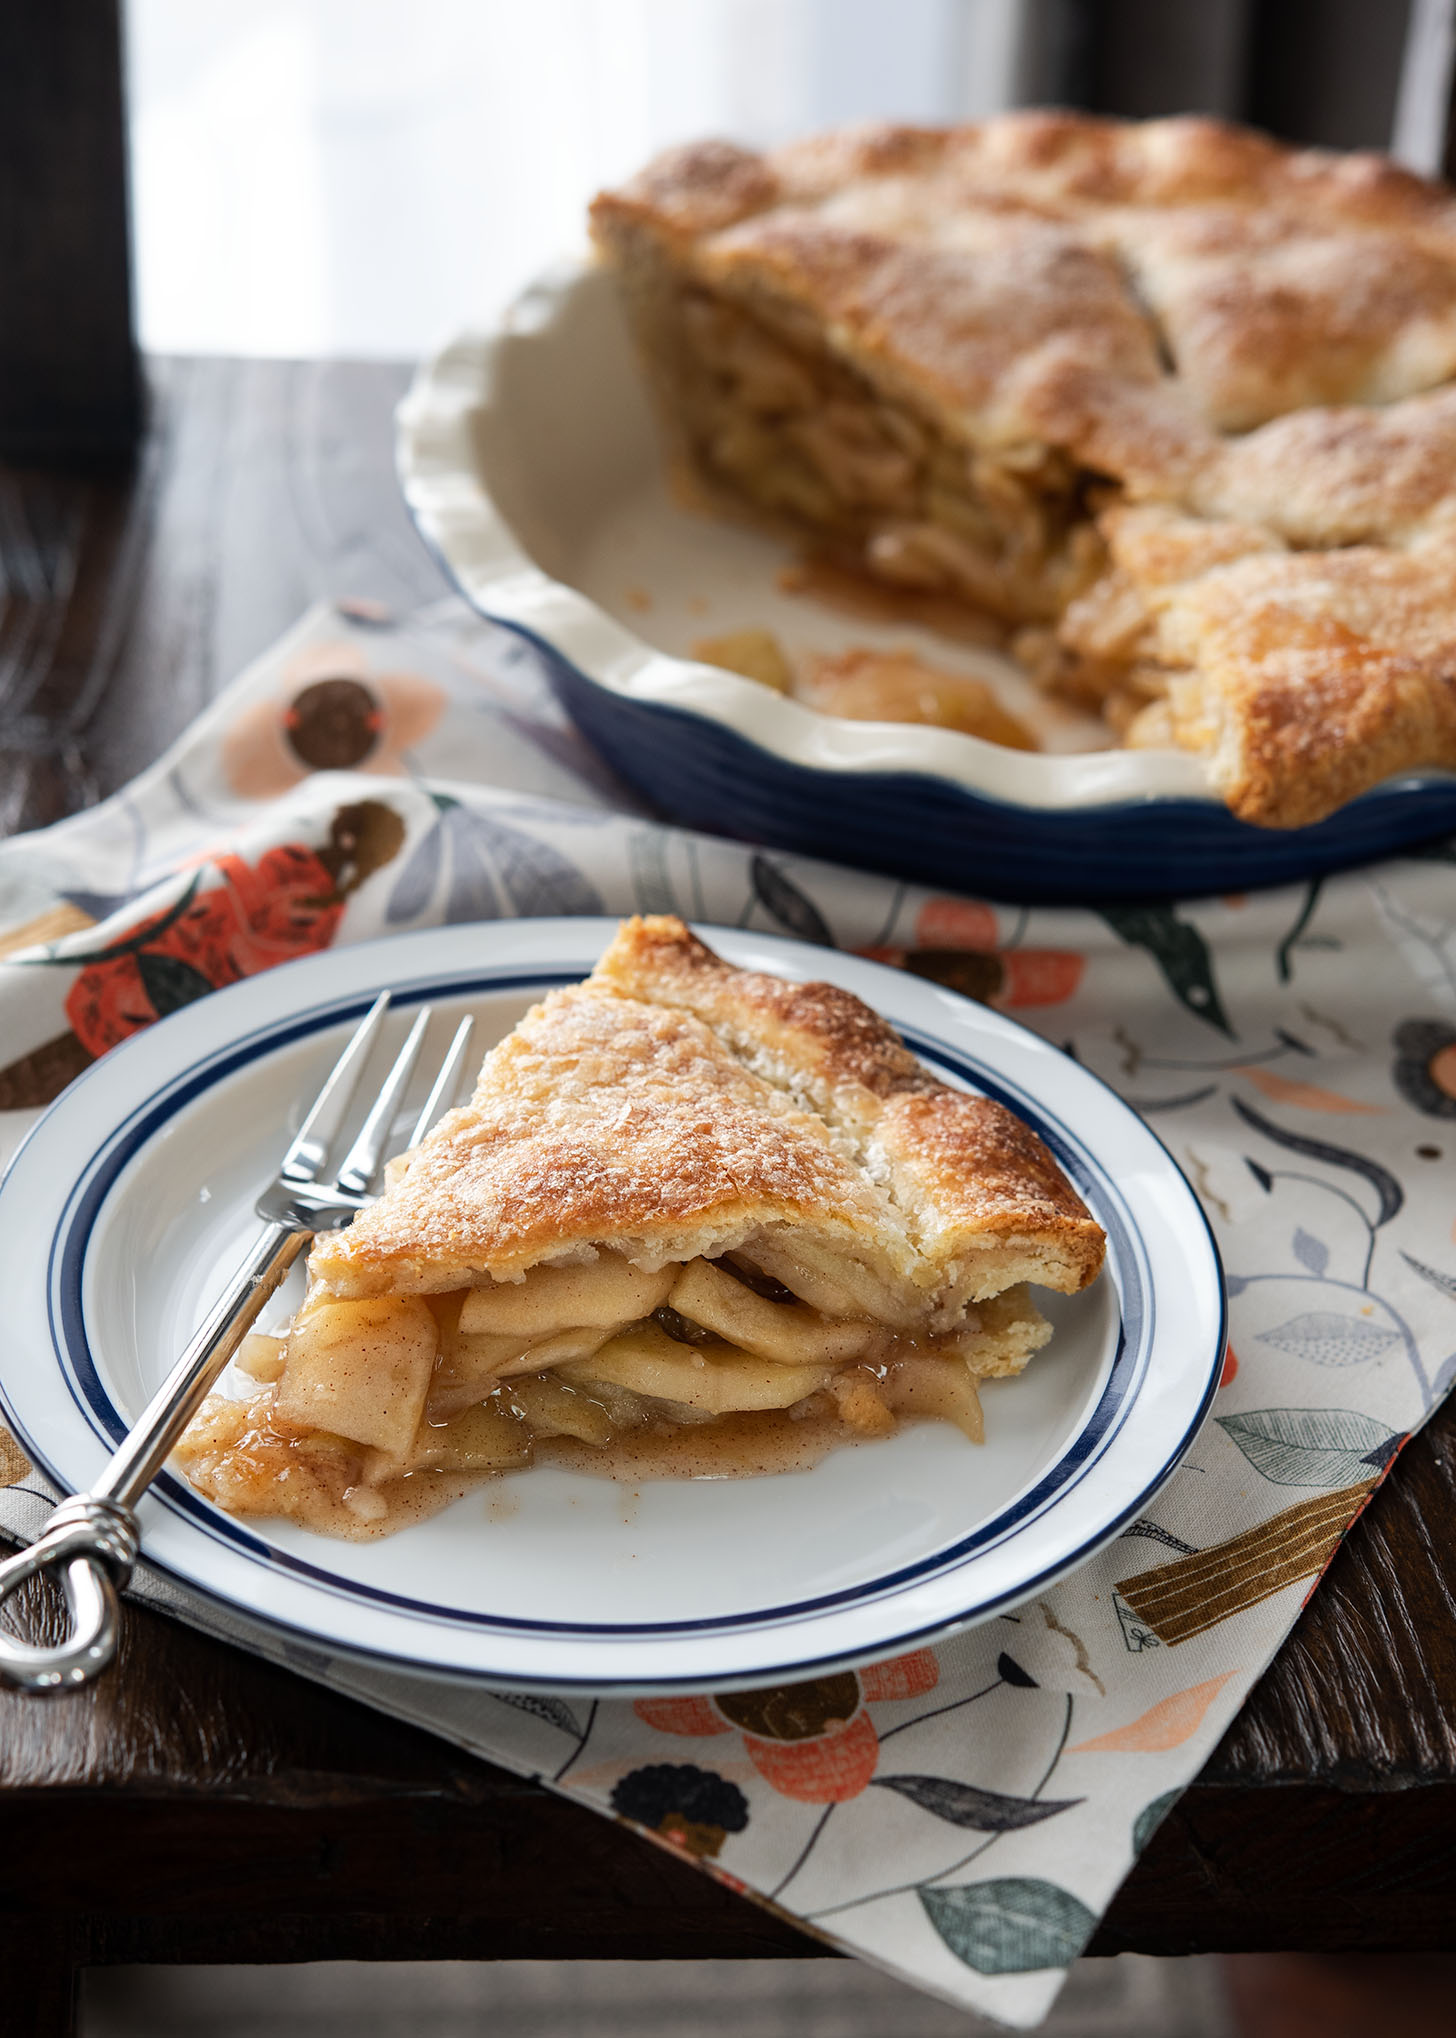 A slice of apple pie with flaky pie crust is showing its apple filling.